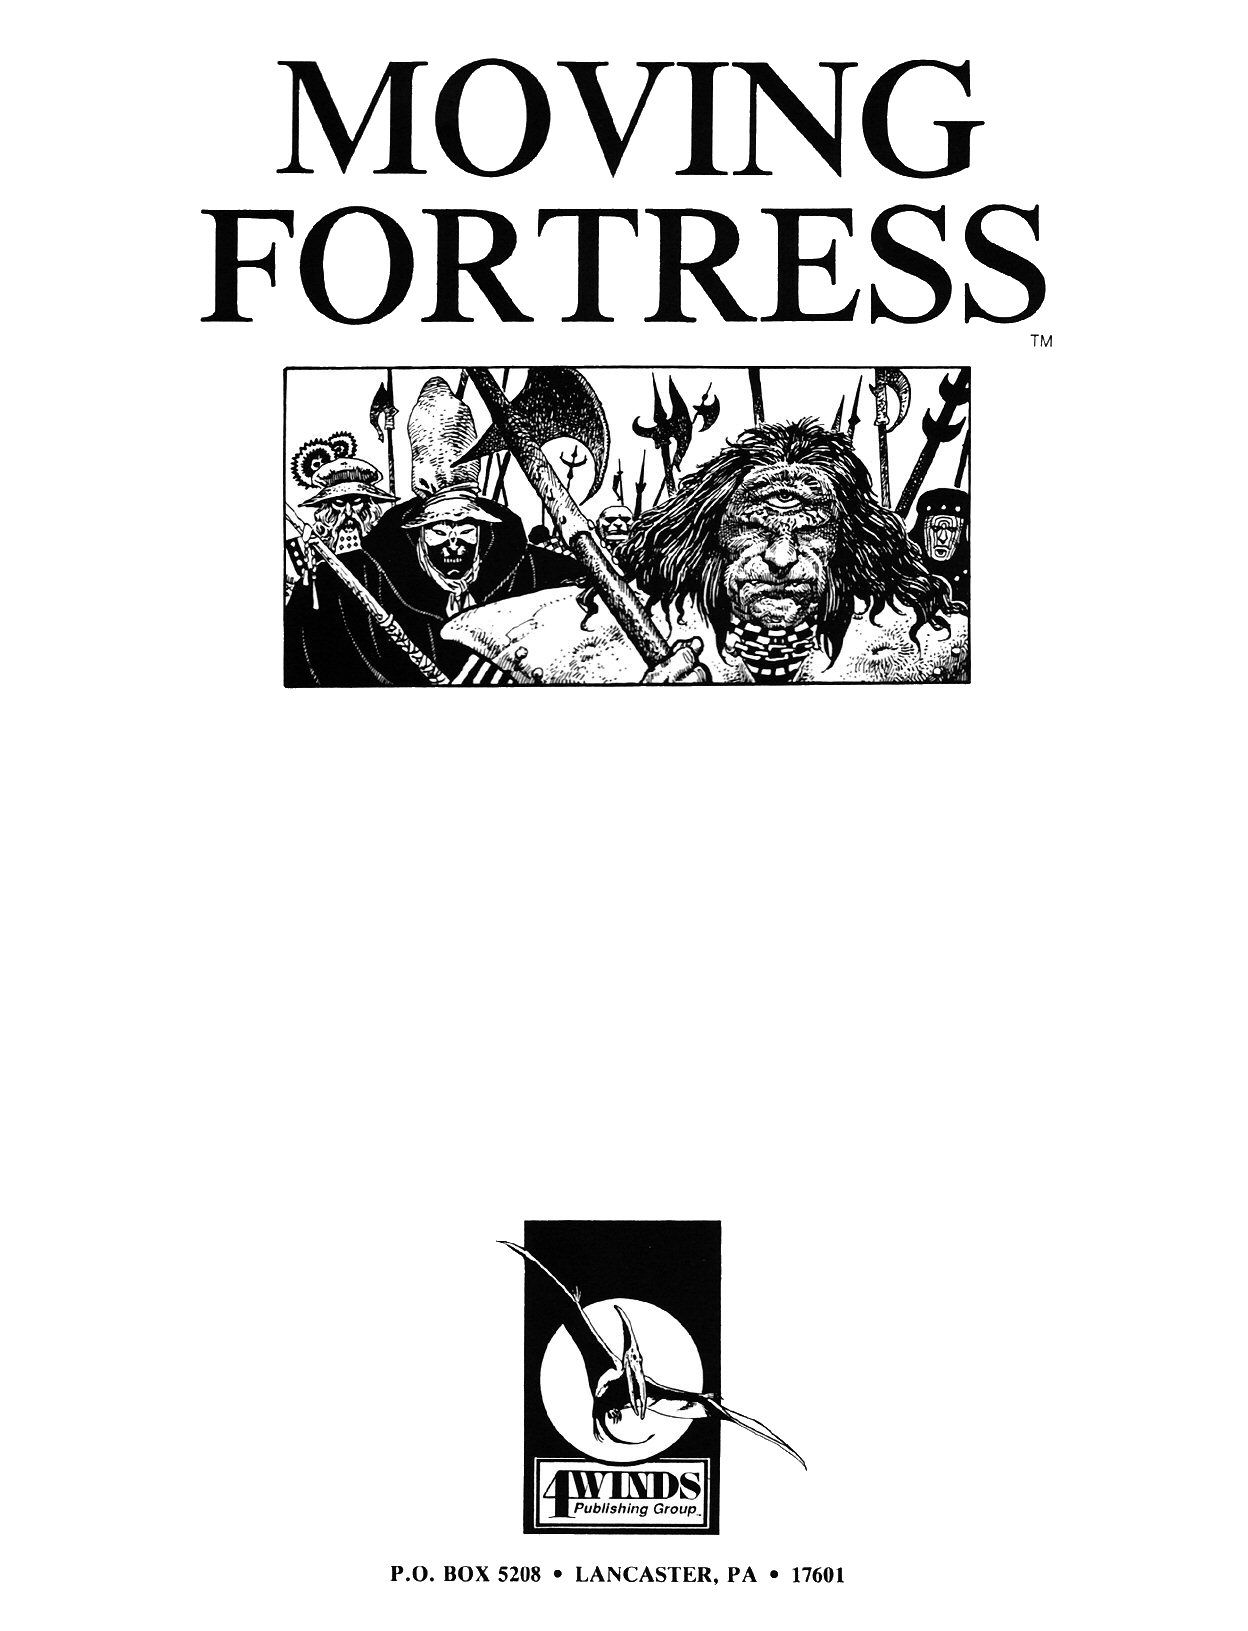 Read online Moving Fortress comic -  Issue # Full - 2